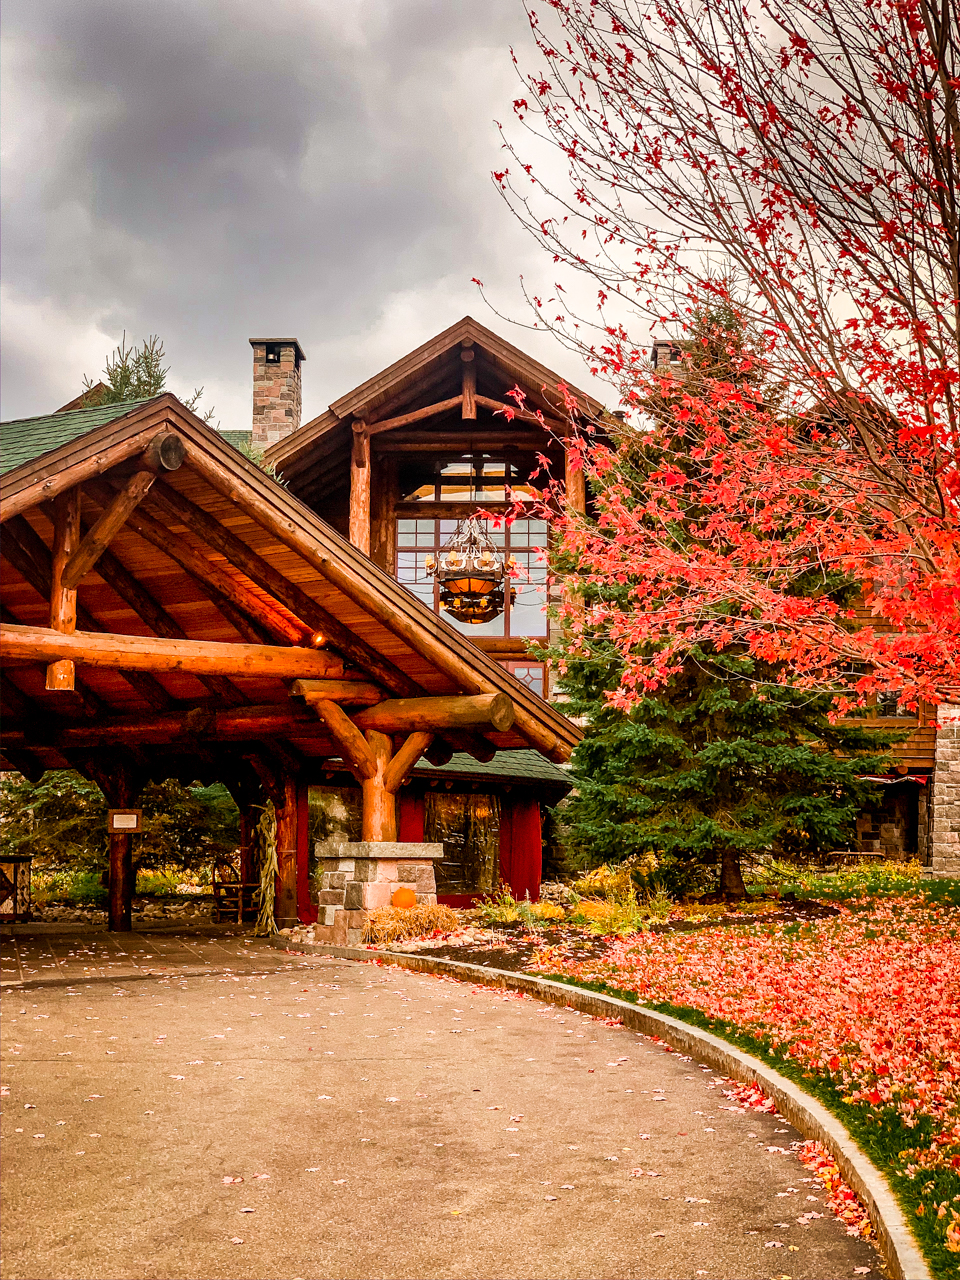 The Whiteface Lodge in Lake Placid review featured by New England travel photographer and blogger, Shannon Shipman